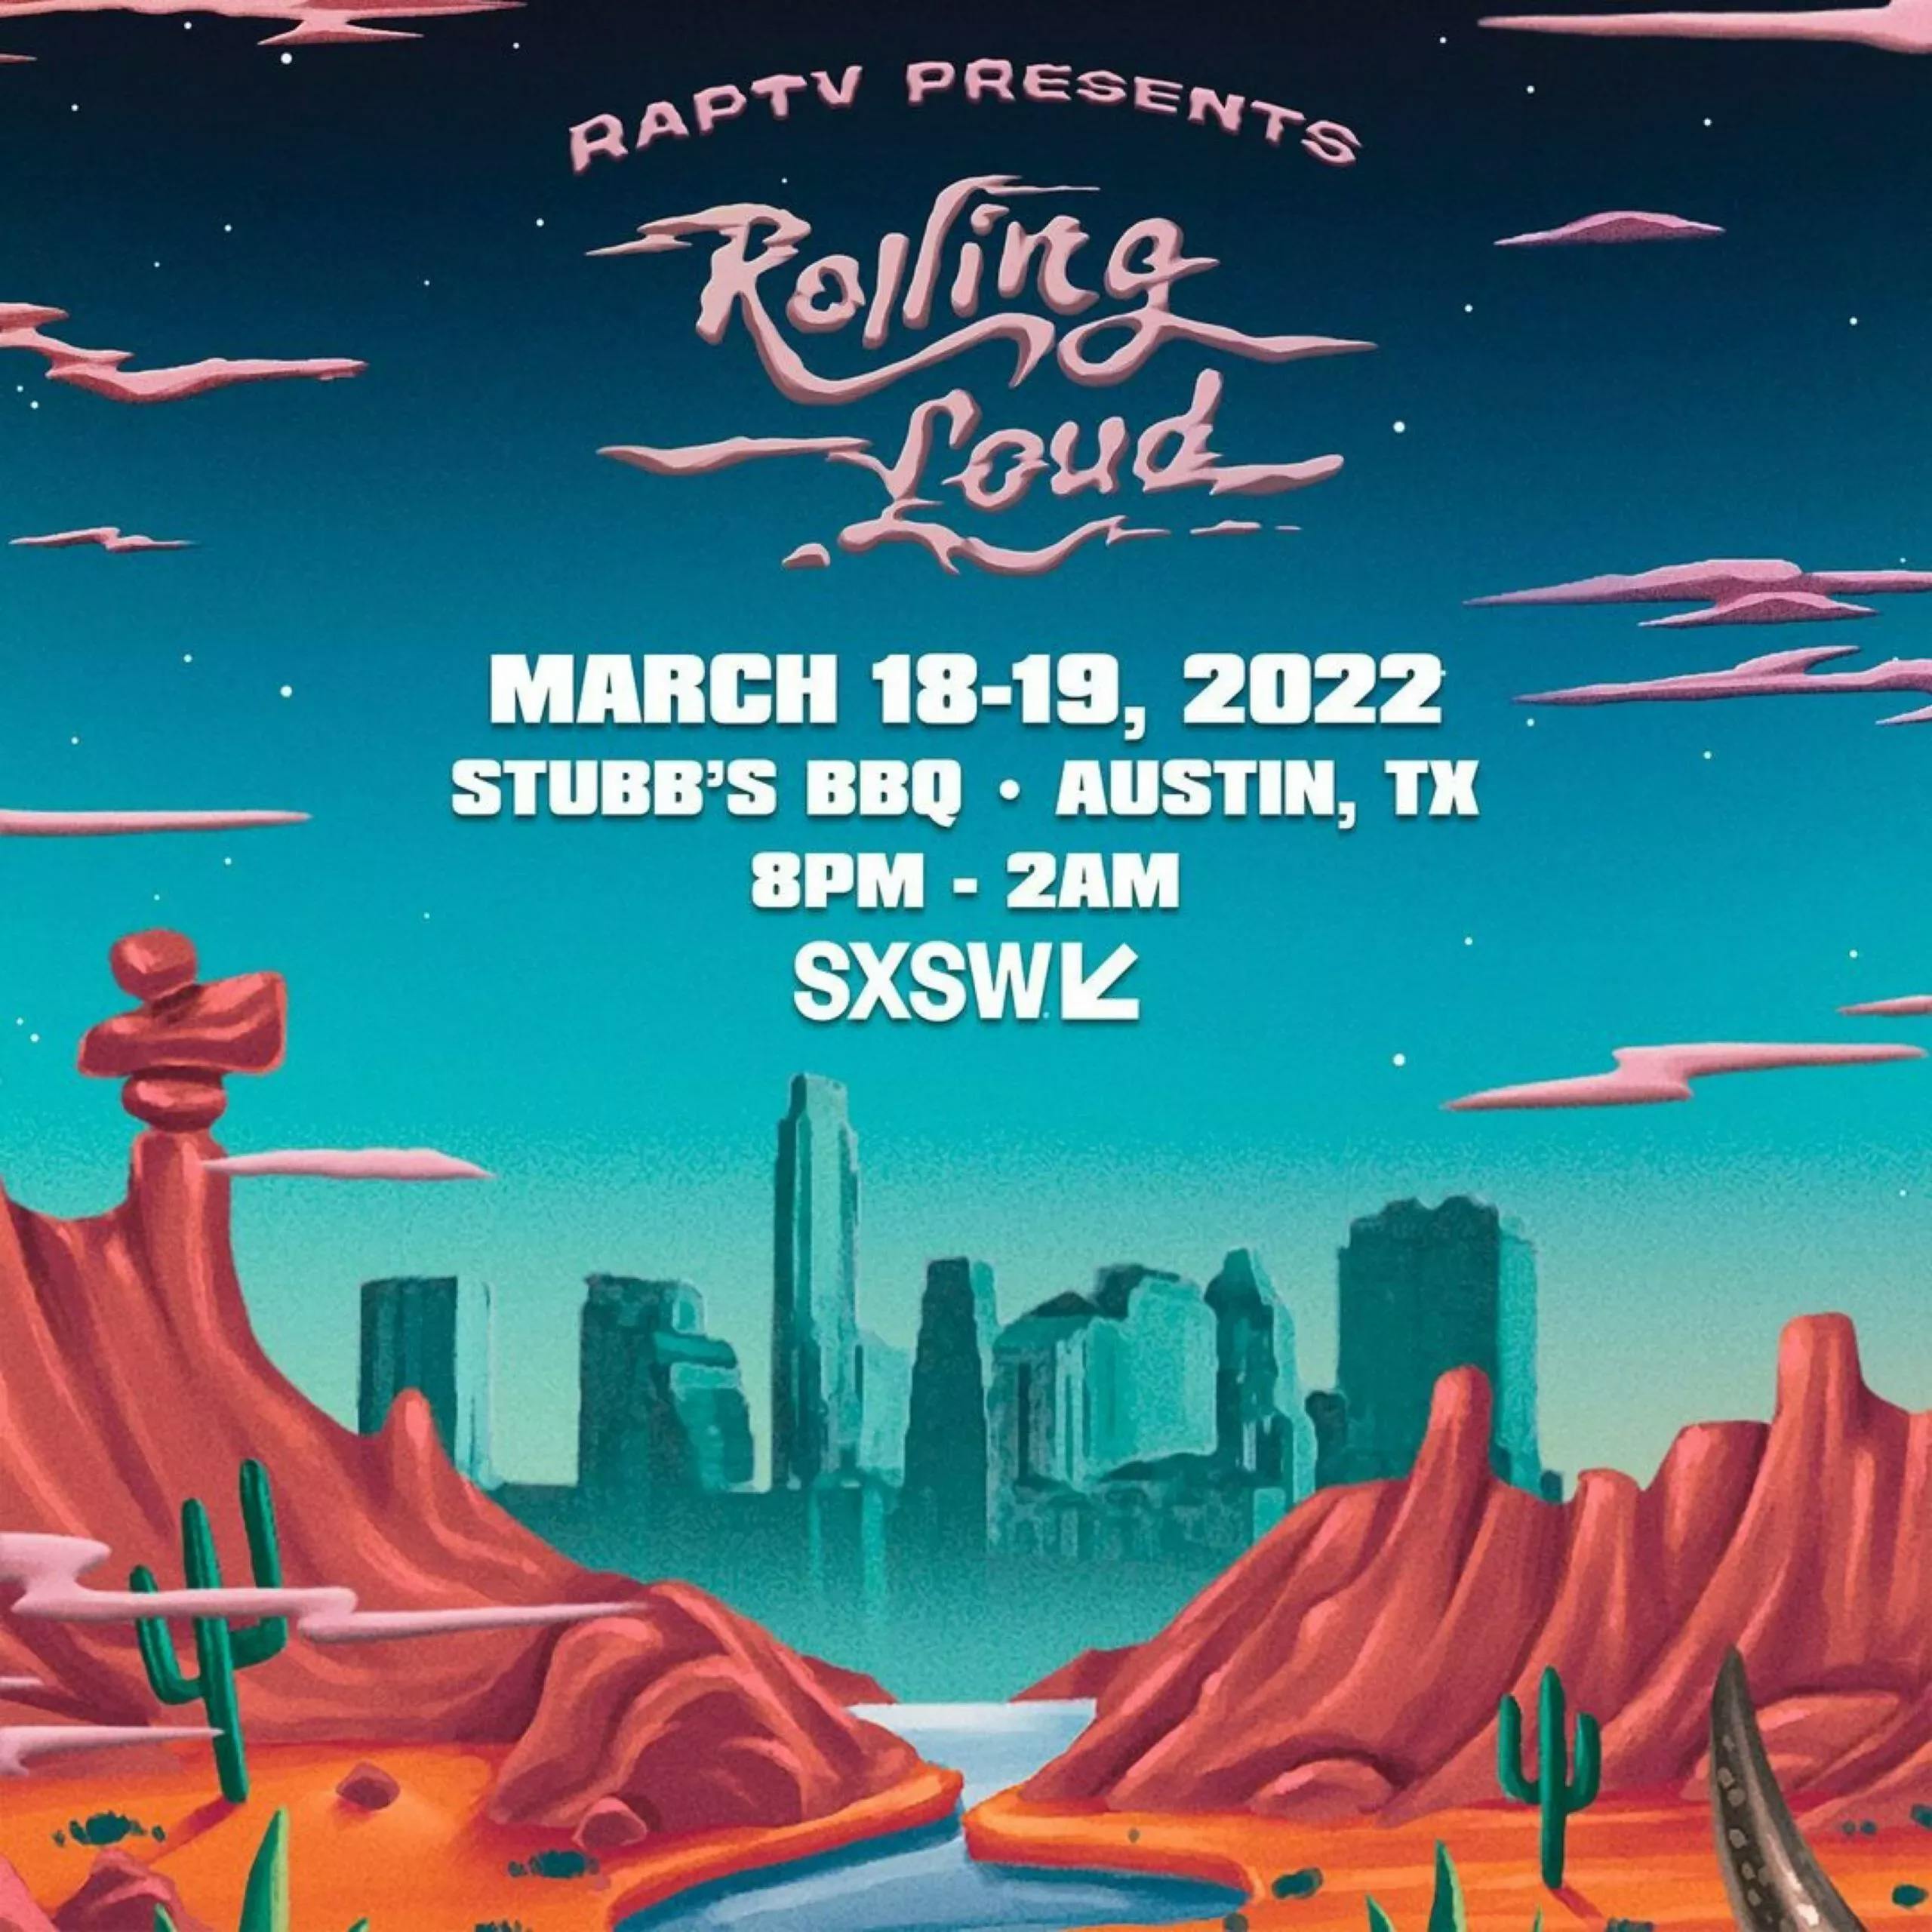 Rolling Loud flyer with dates and location